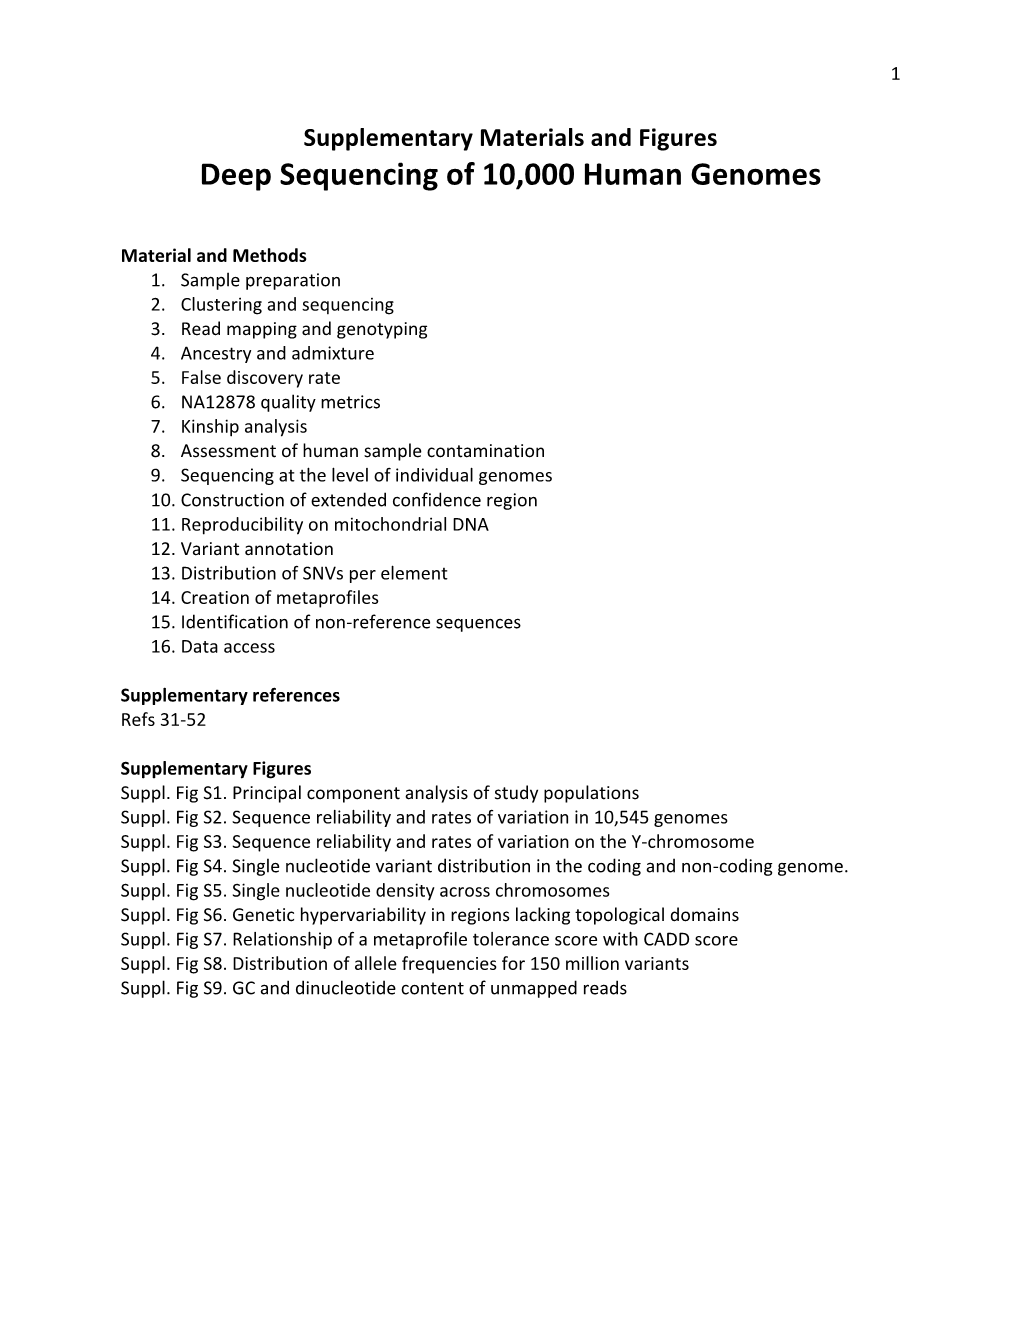 Deep Sequencing of 10,000 Human Genomes